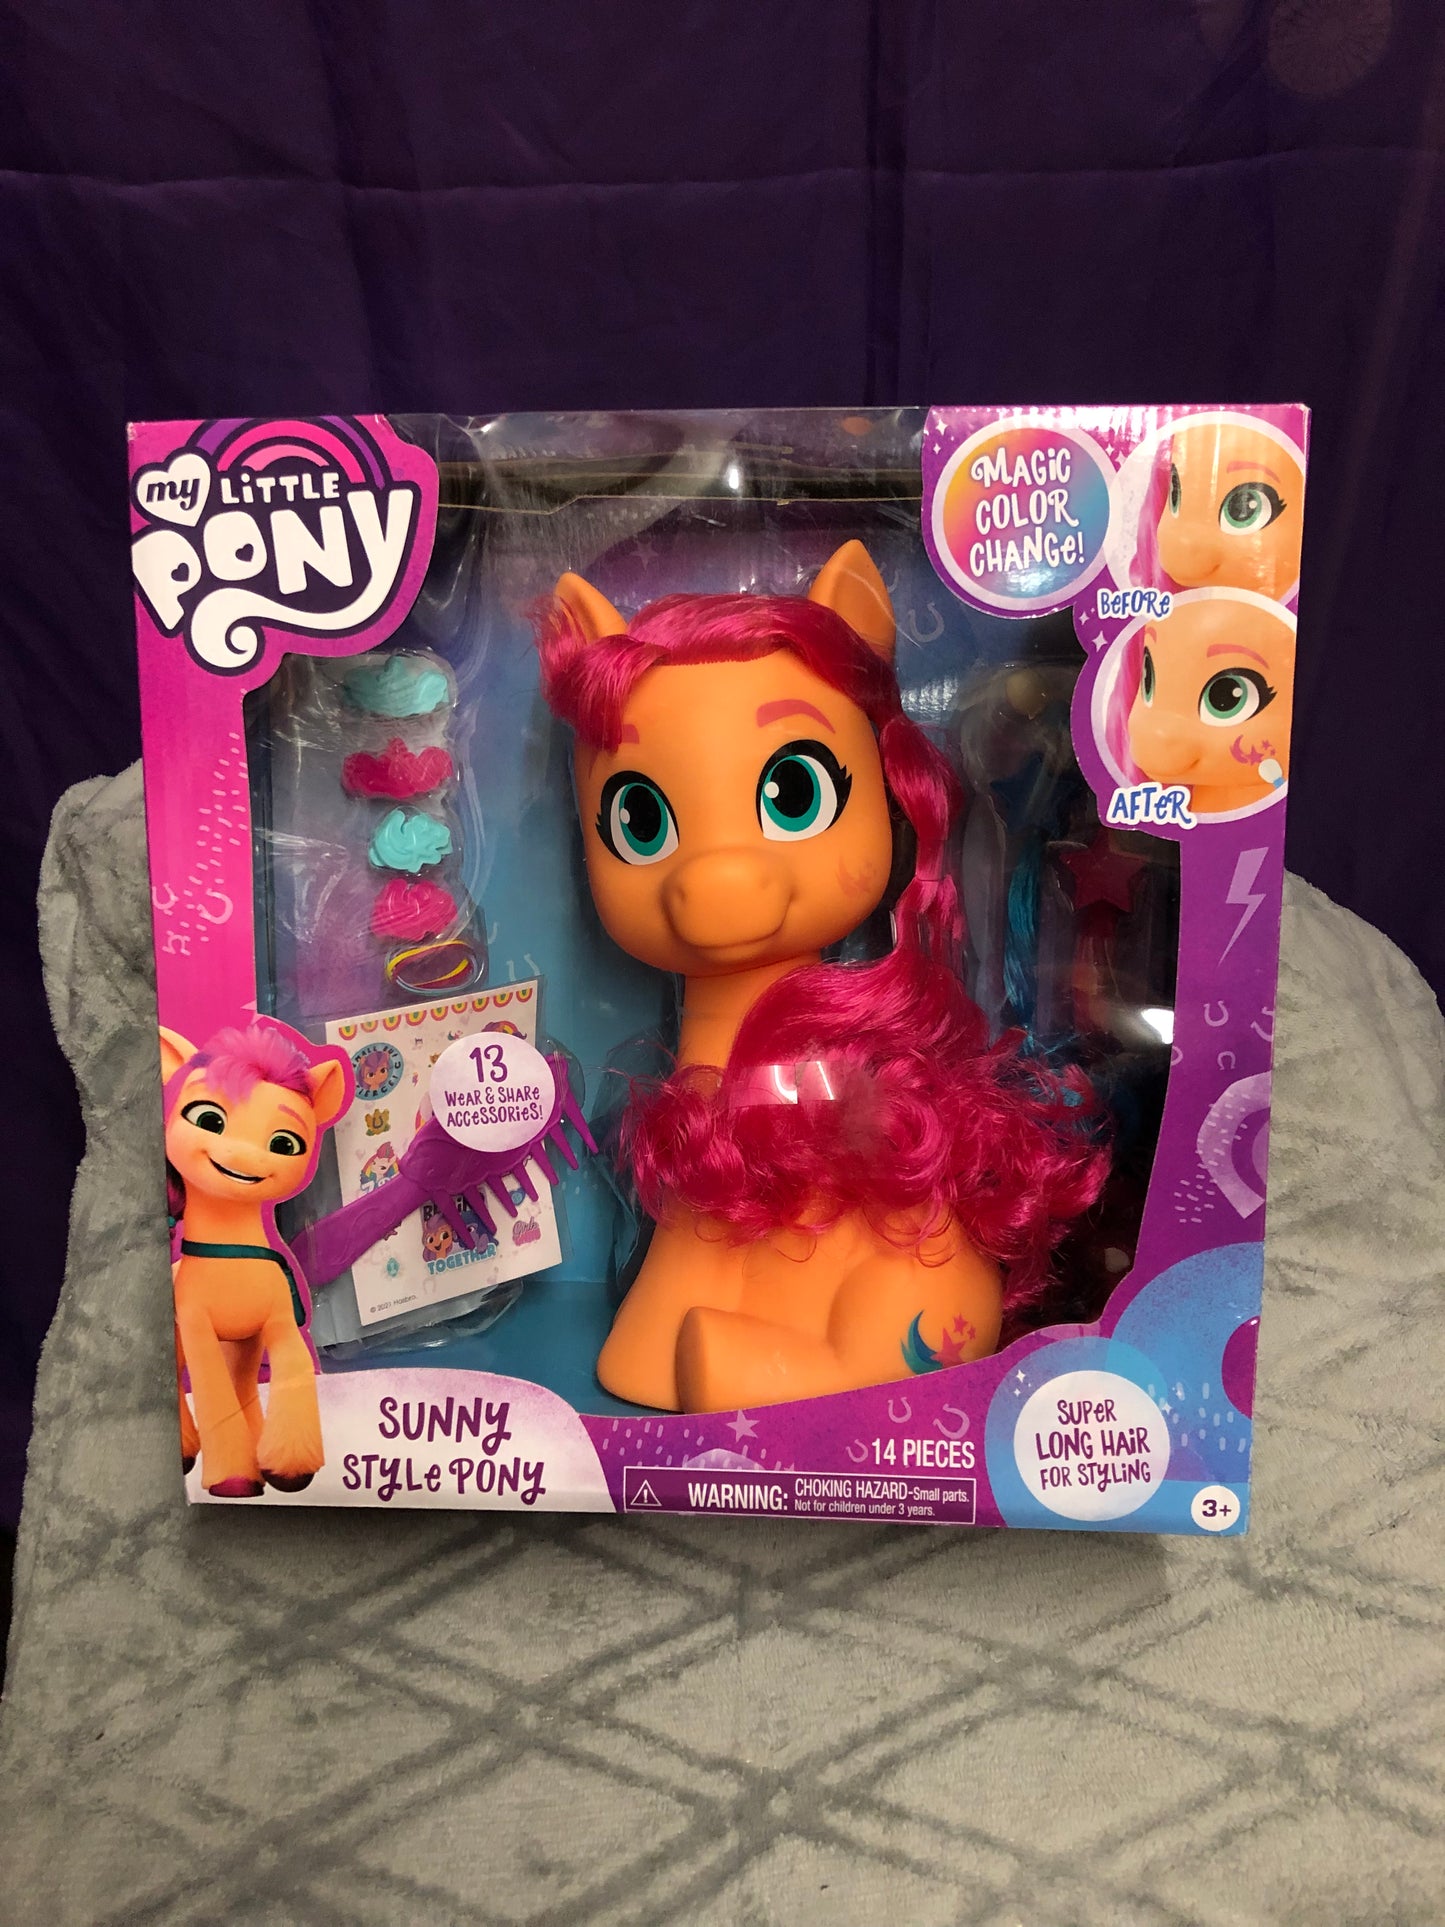 My Little Pony Magic Color Change. Sunny Starcout Style Pony. "New Arrivals" Only 1 Left